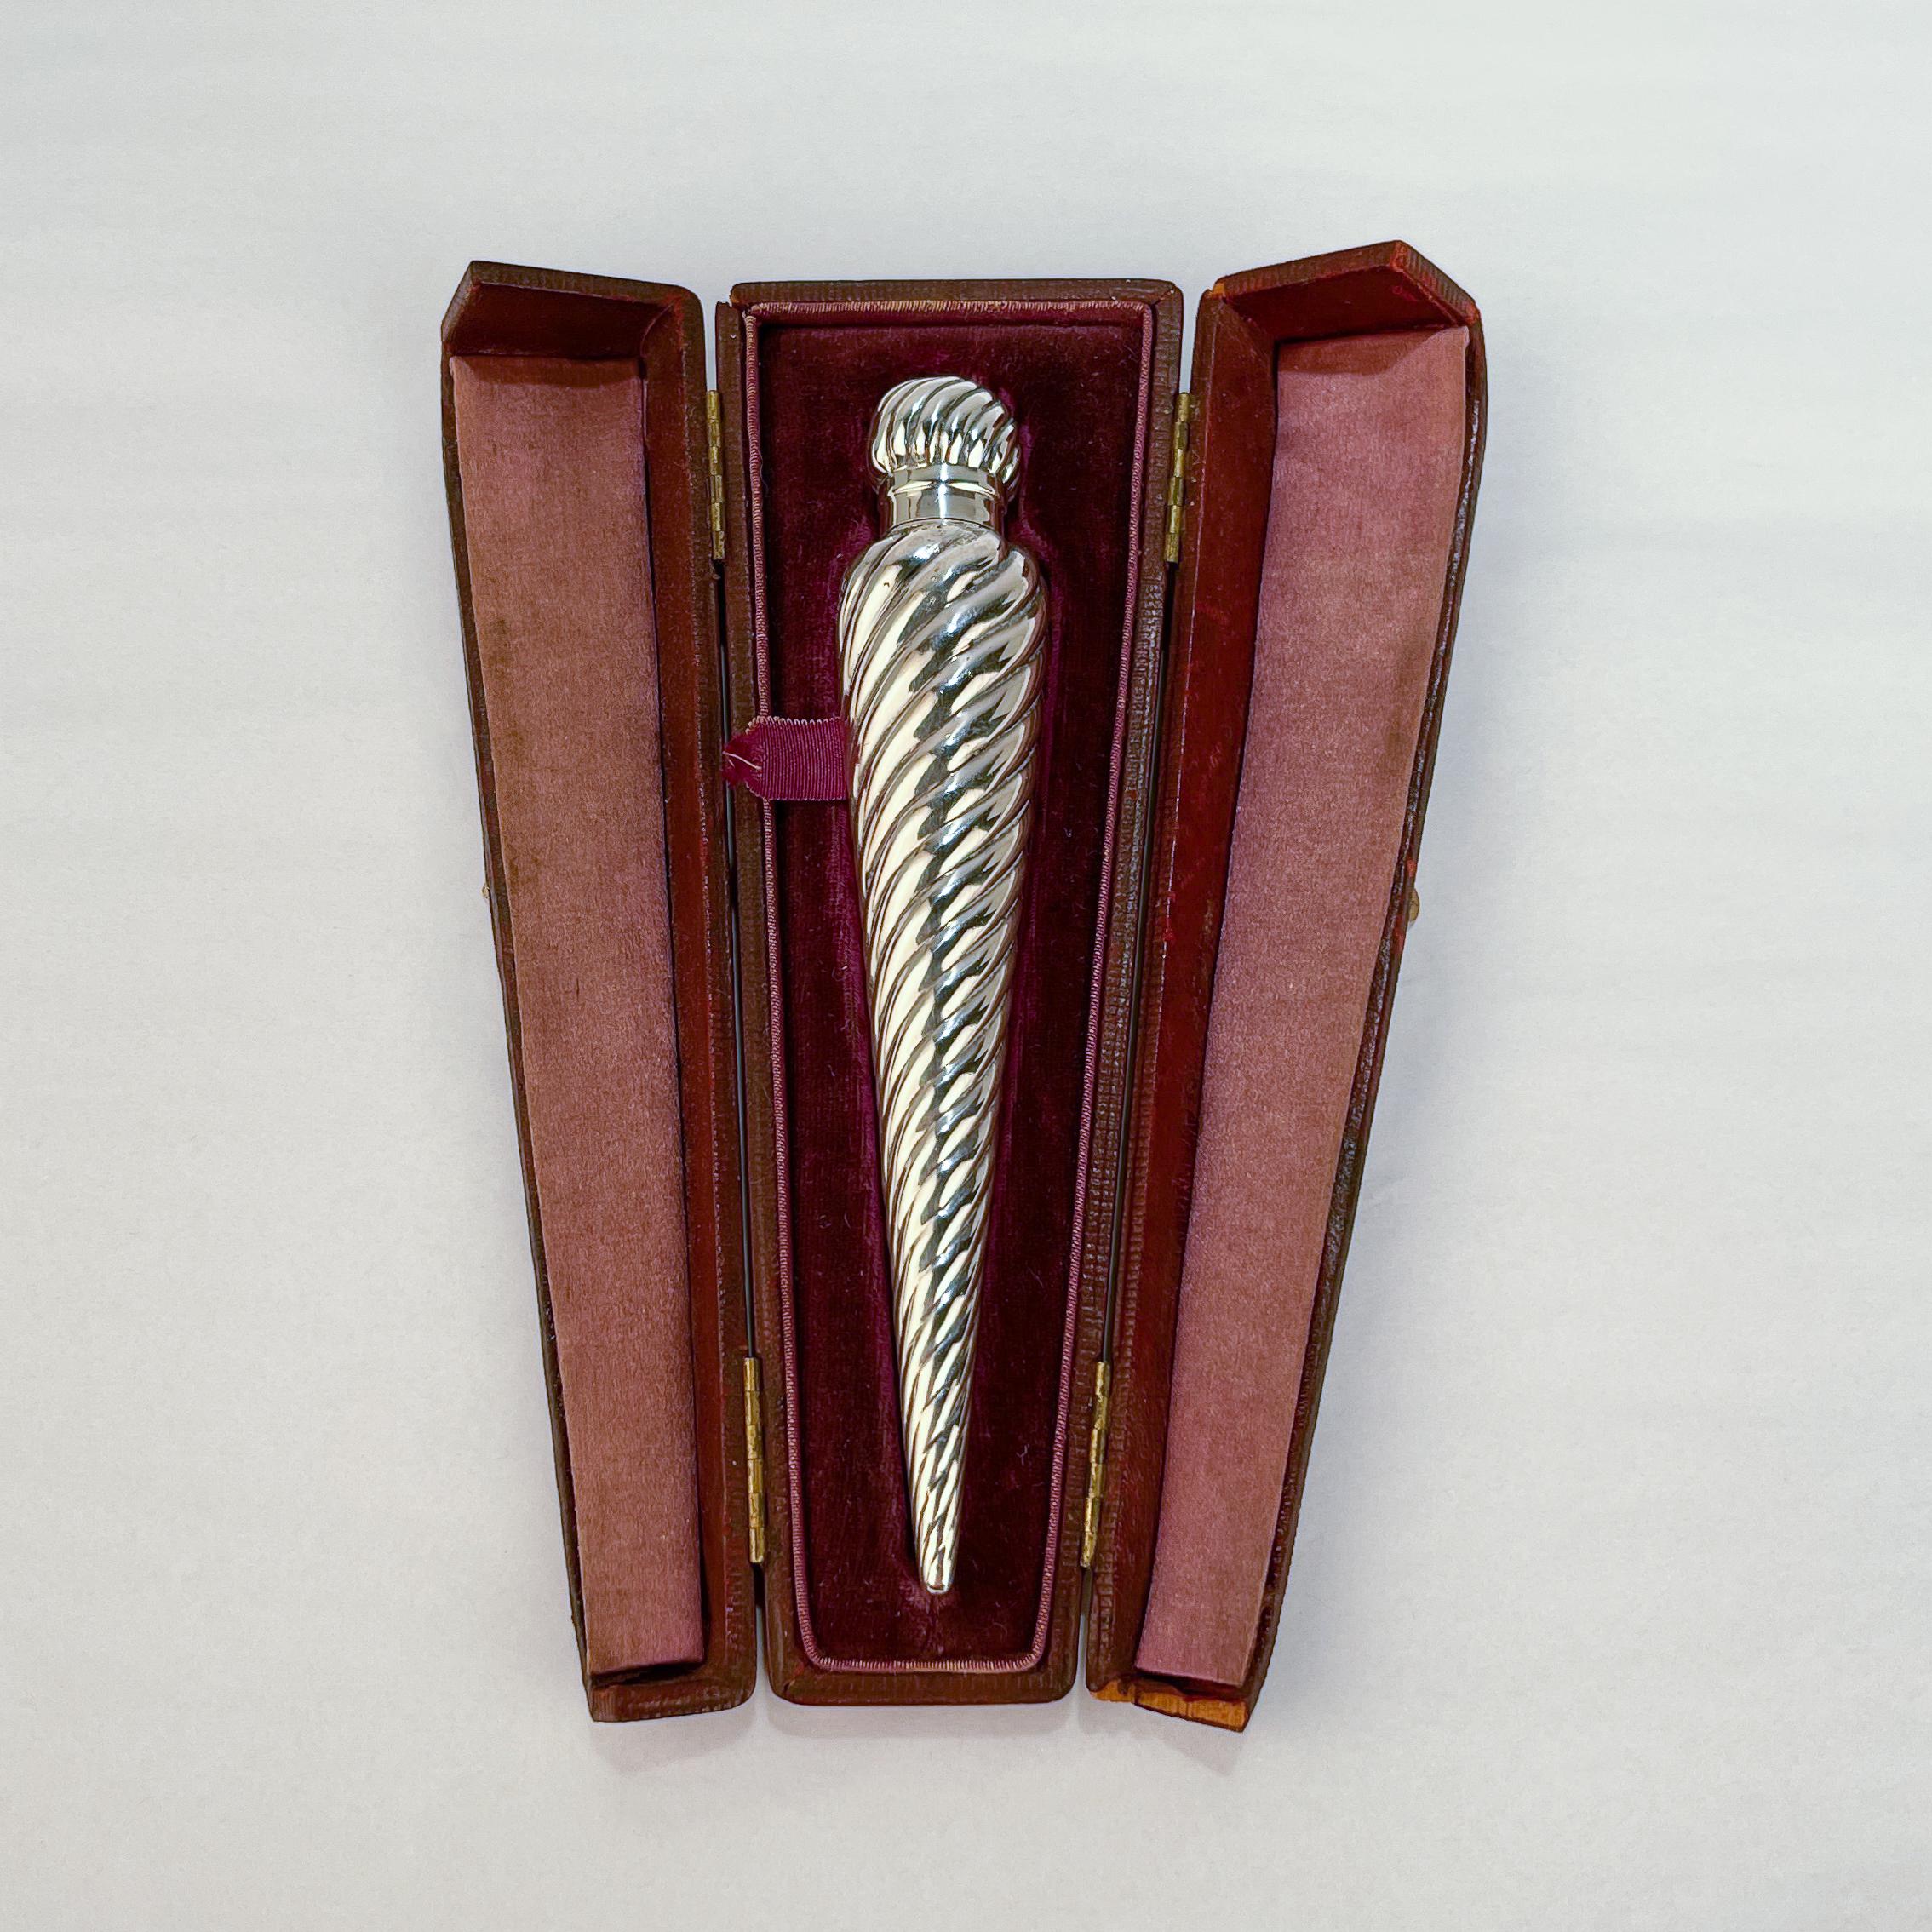 A fine antique English sterling silver perfume flask.

With a tapered spiral form body and a conforming lid.

Made by Gourdel, Vales, & Co. 

Together with its original fitted leather case. 

Simply a wonderful Late Victorian perfume